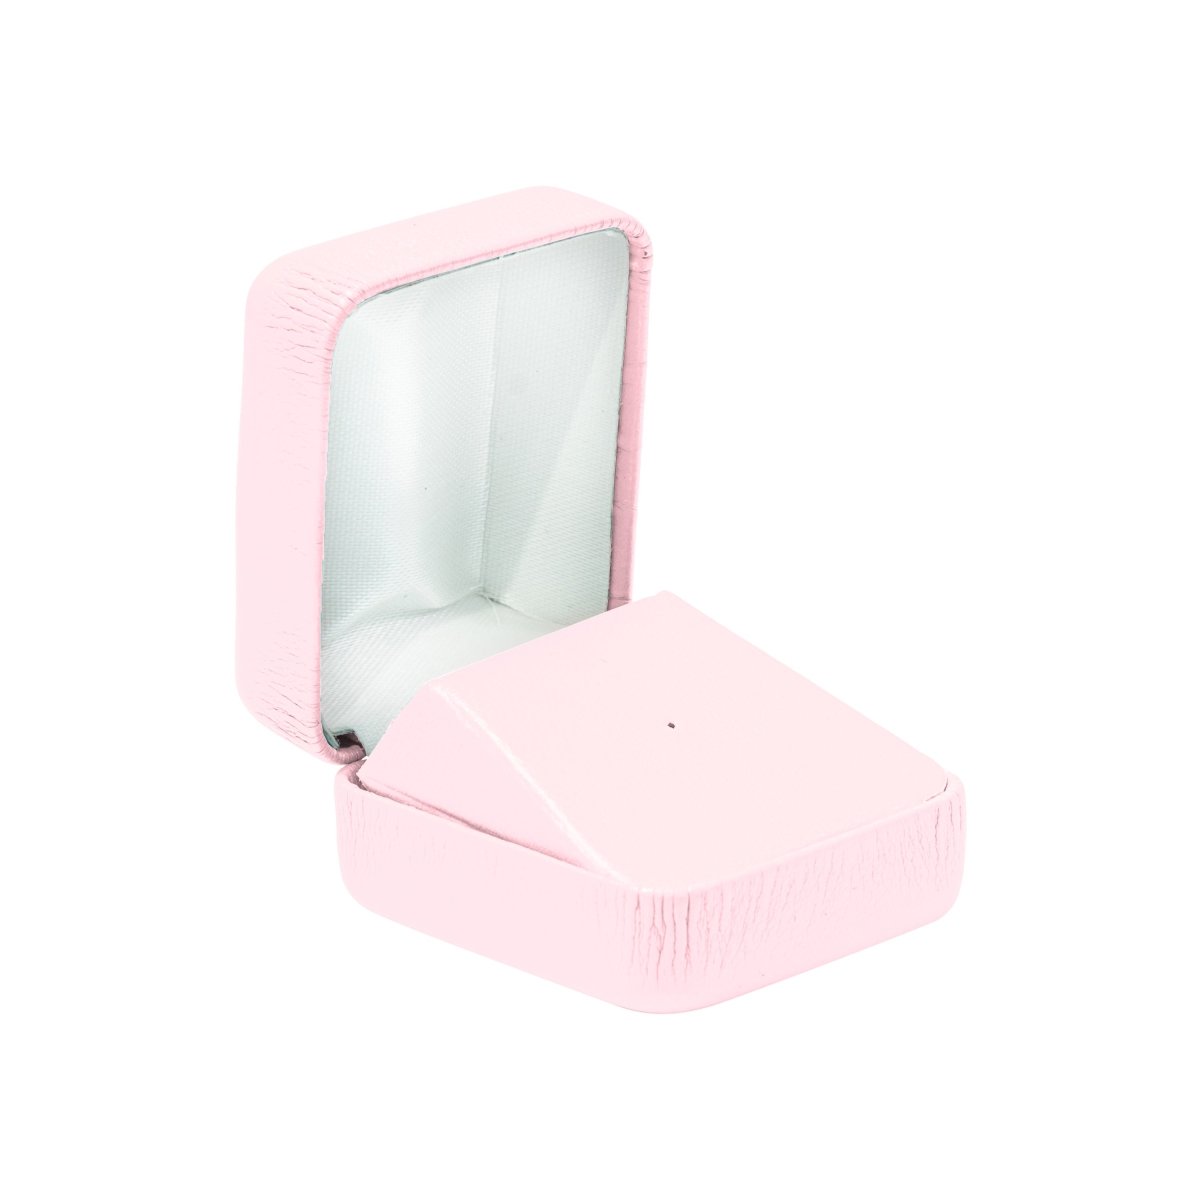 Vibrant Leatherette Tie Tack Box - Prestige and Fancy - Pink Leatherette